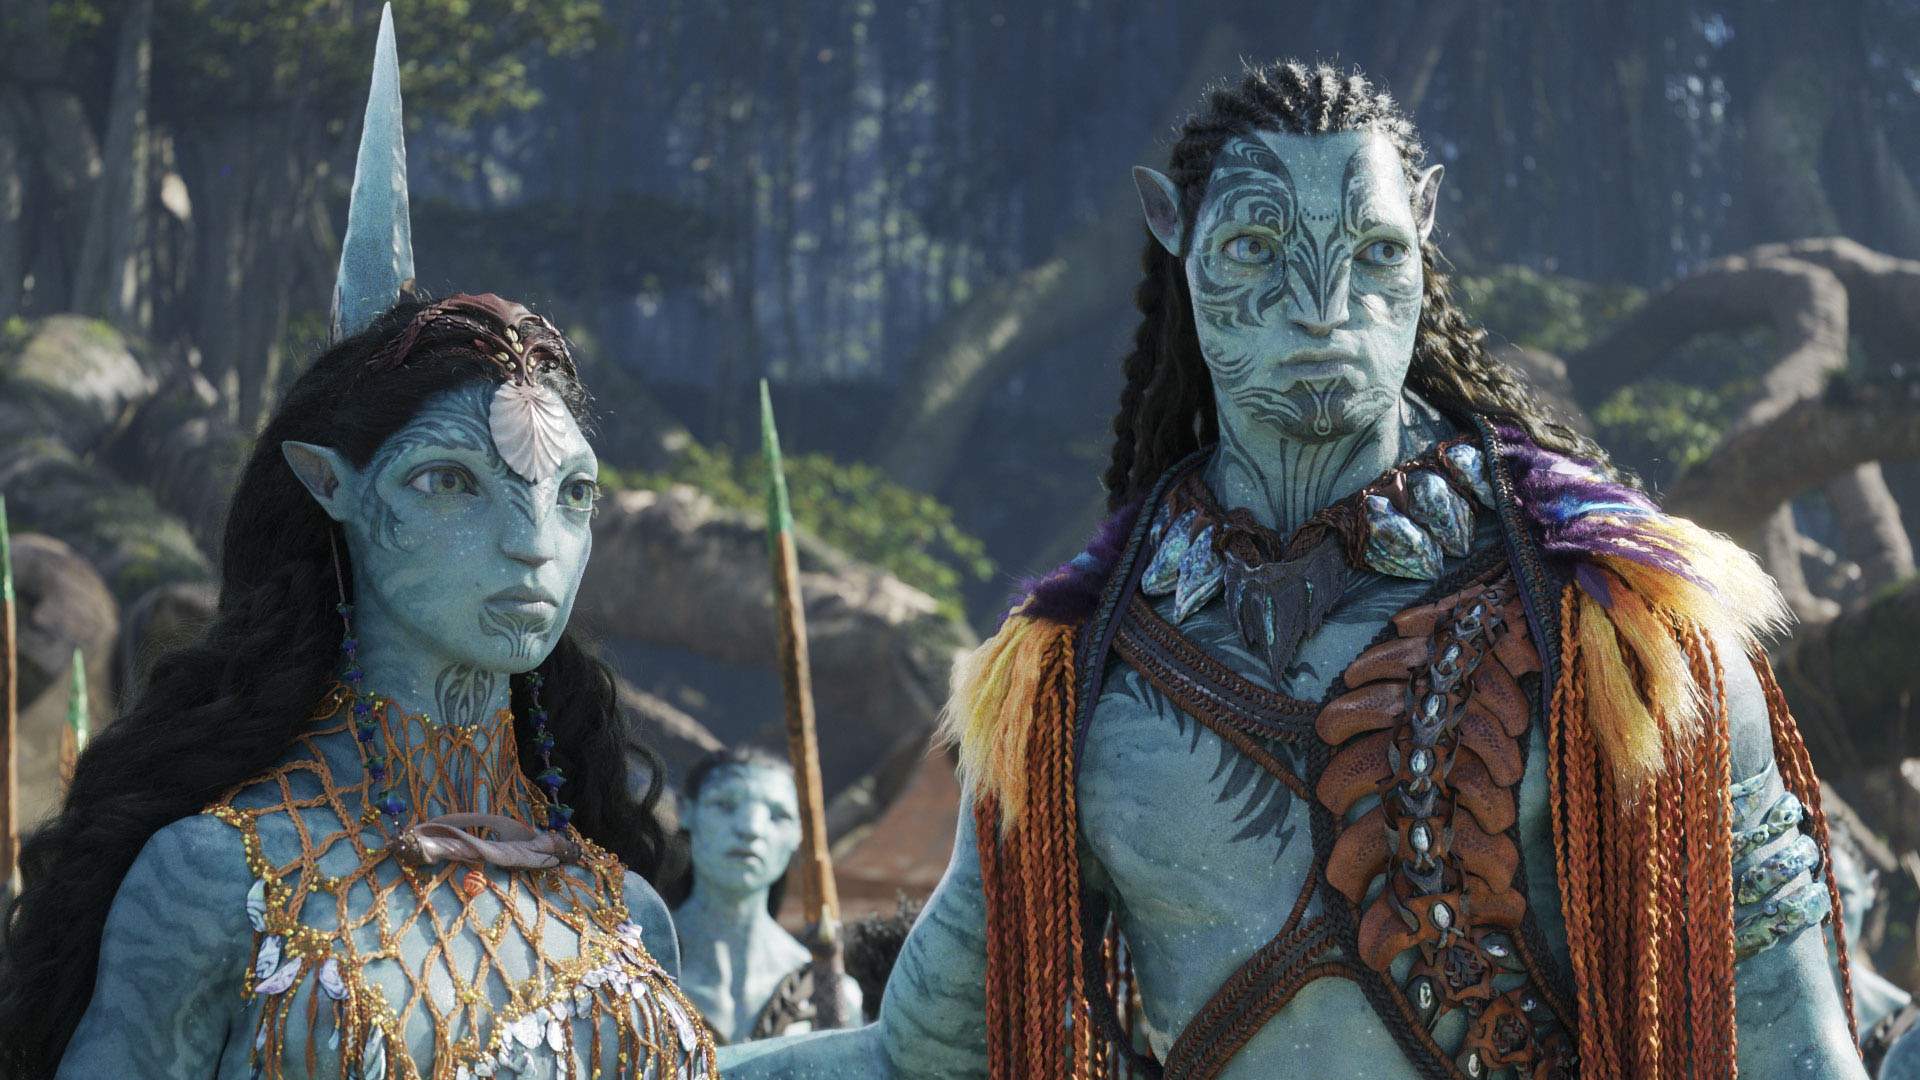 Return to Pandora: James Cameron's 'Avatar' Sequel 'The Way of Water' Just Dropped Its Full Trailer